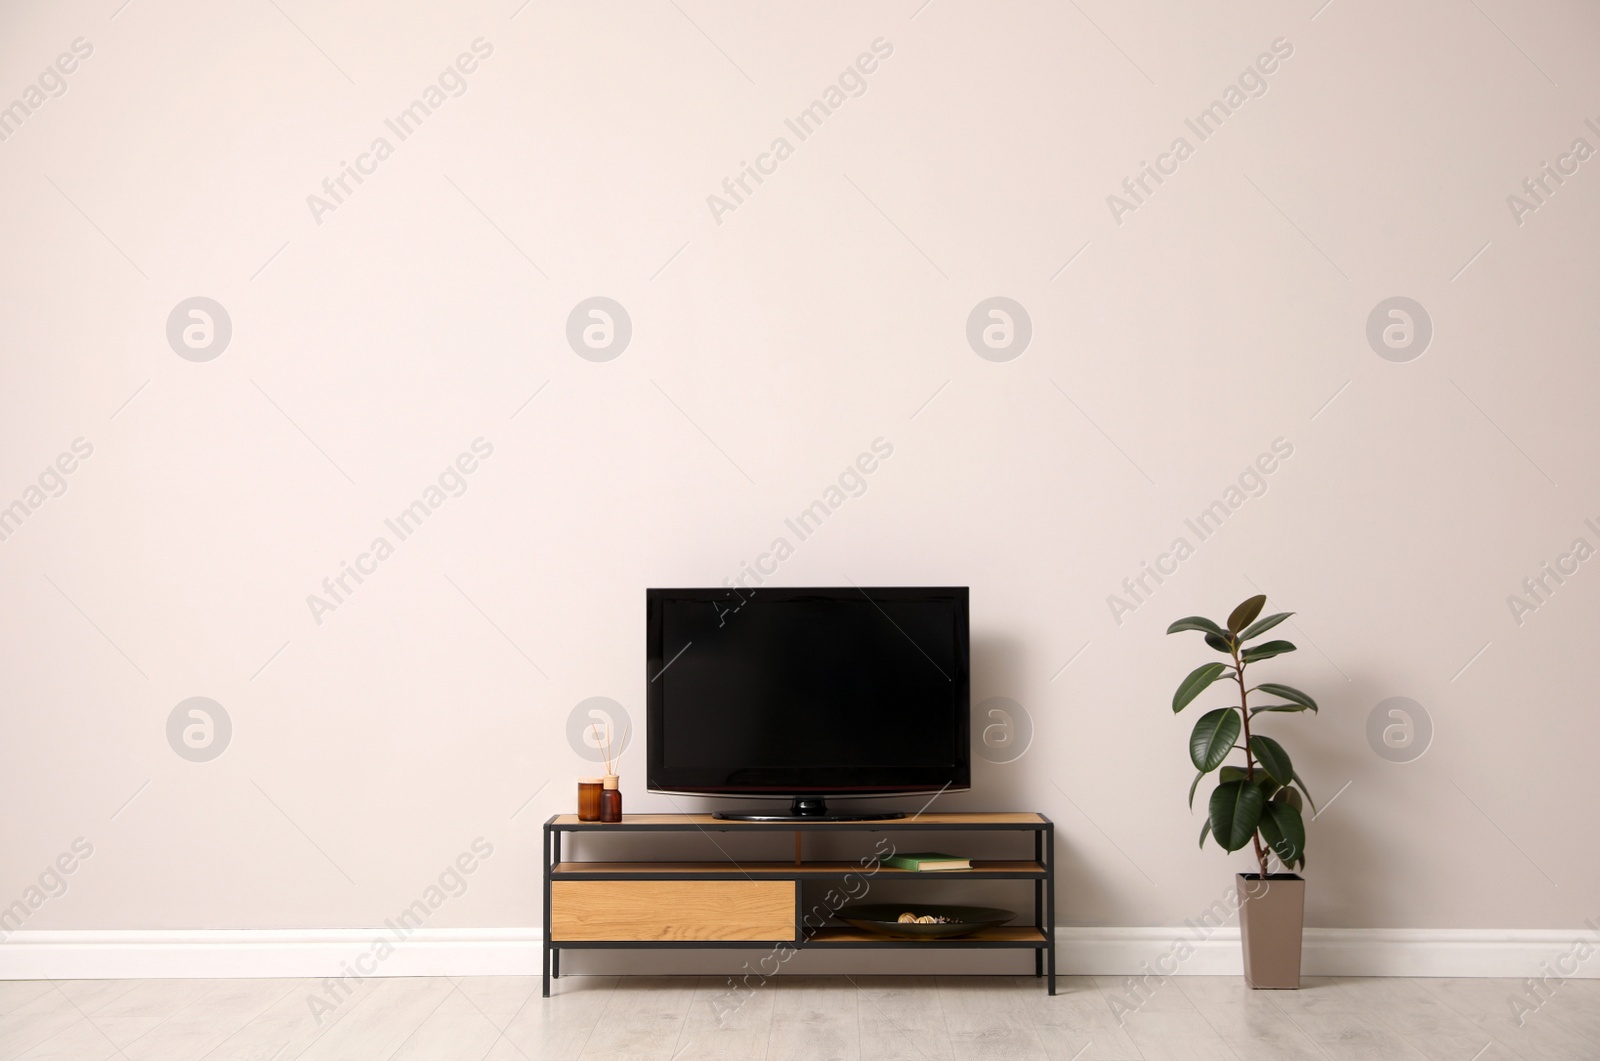 Photo of Elegant room interior with TV on cabinet and houseplant near light wall